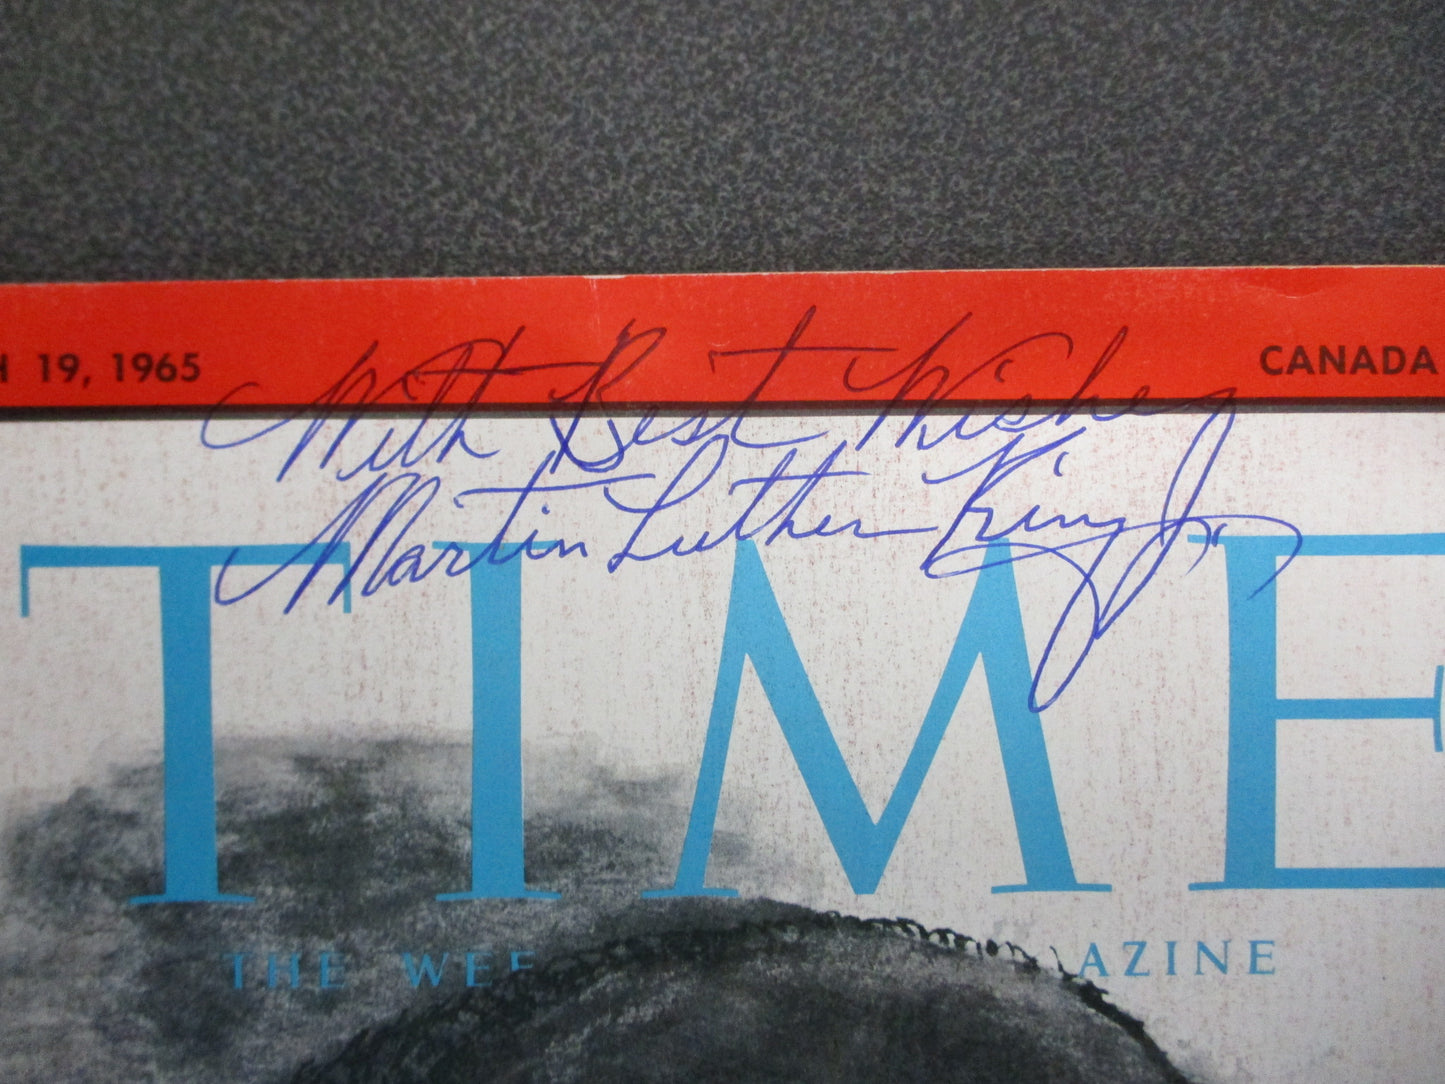 Martin Luther King Jr Signed Time Magazine Cover March 19. 1965 w/COA